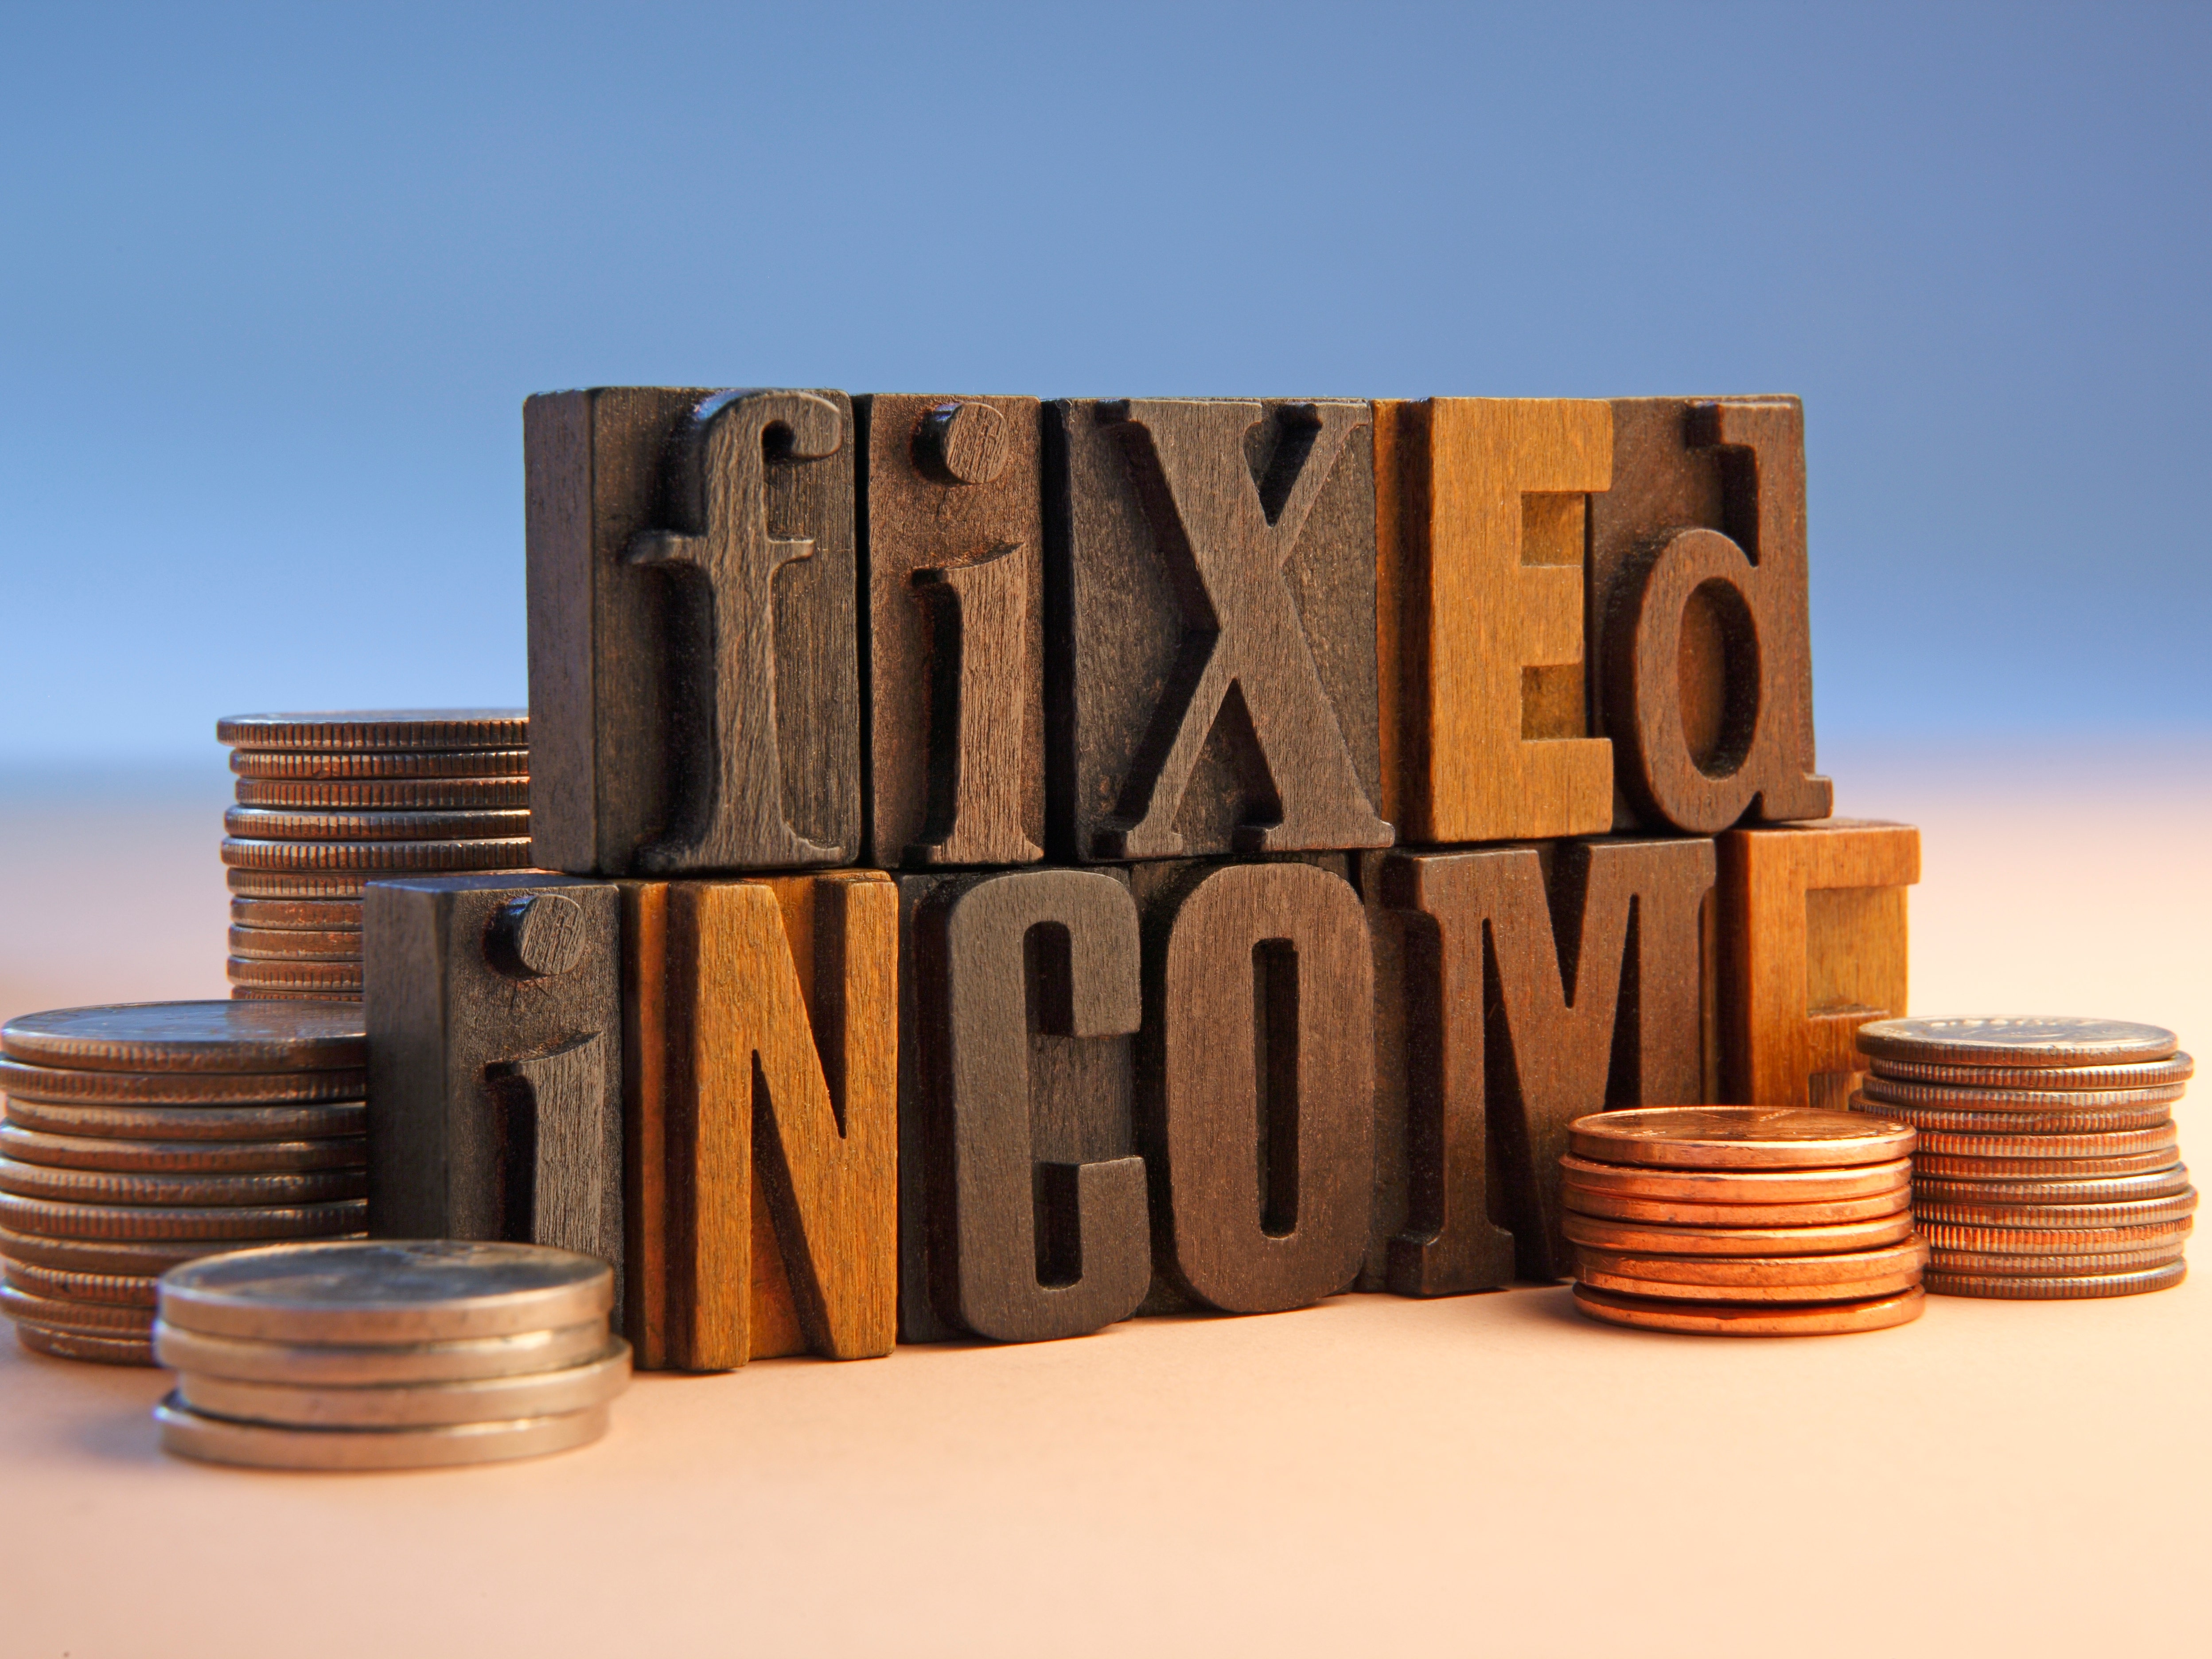 Is Fixed Income Failing? It May Be Time To Look At The Index | Seeking Alpha